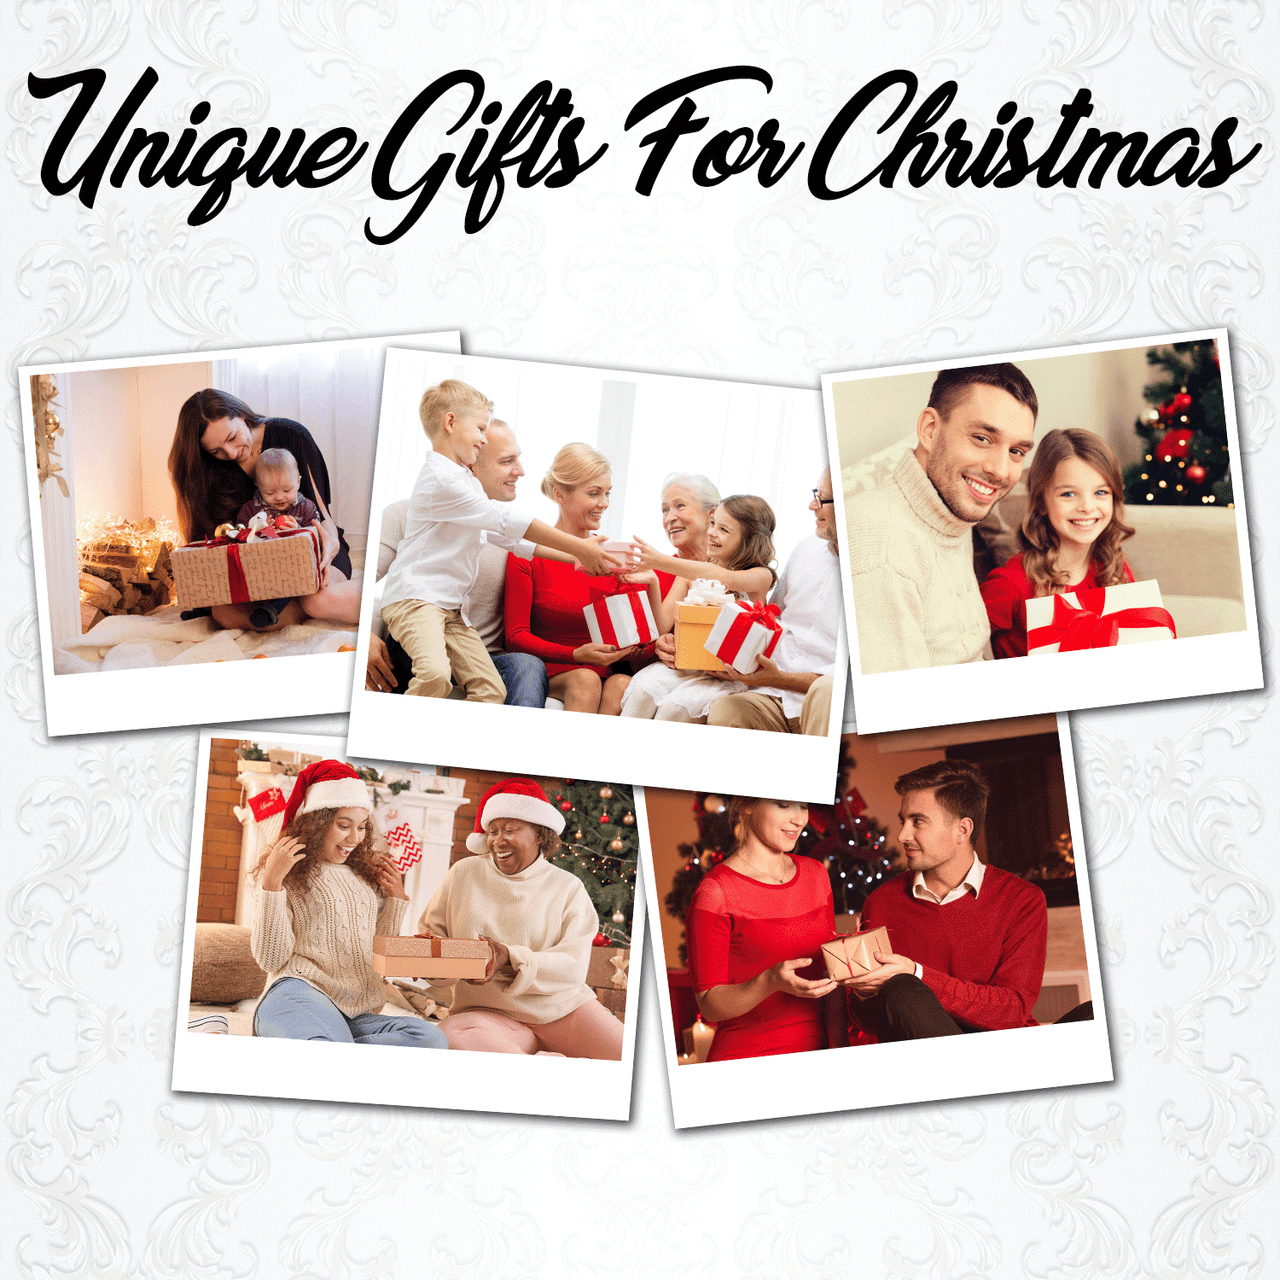 Our First Christmas Engaged with Photo Personalized Christmas Premium Ceramic Ornaments Sets for Christmas Tree